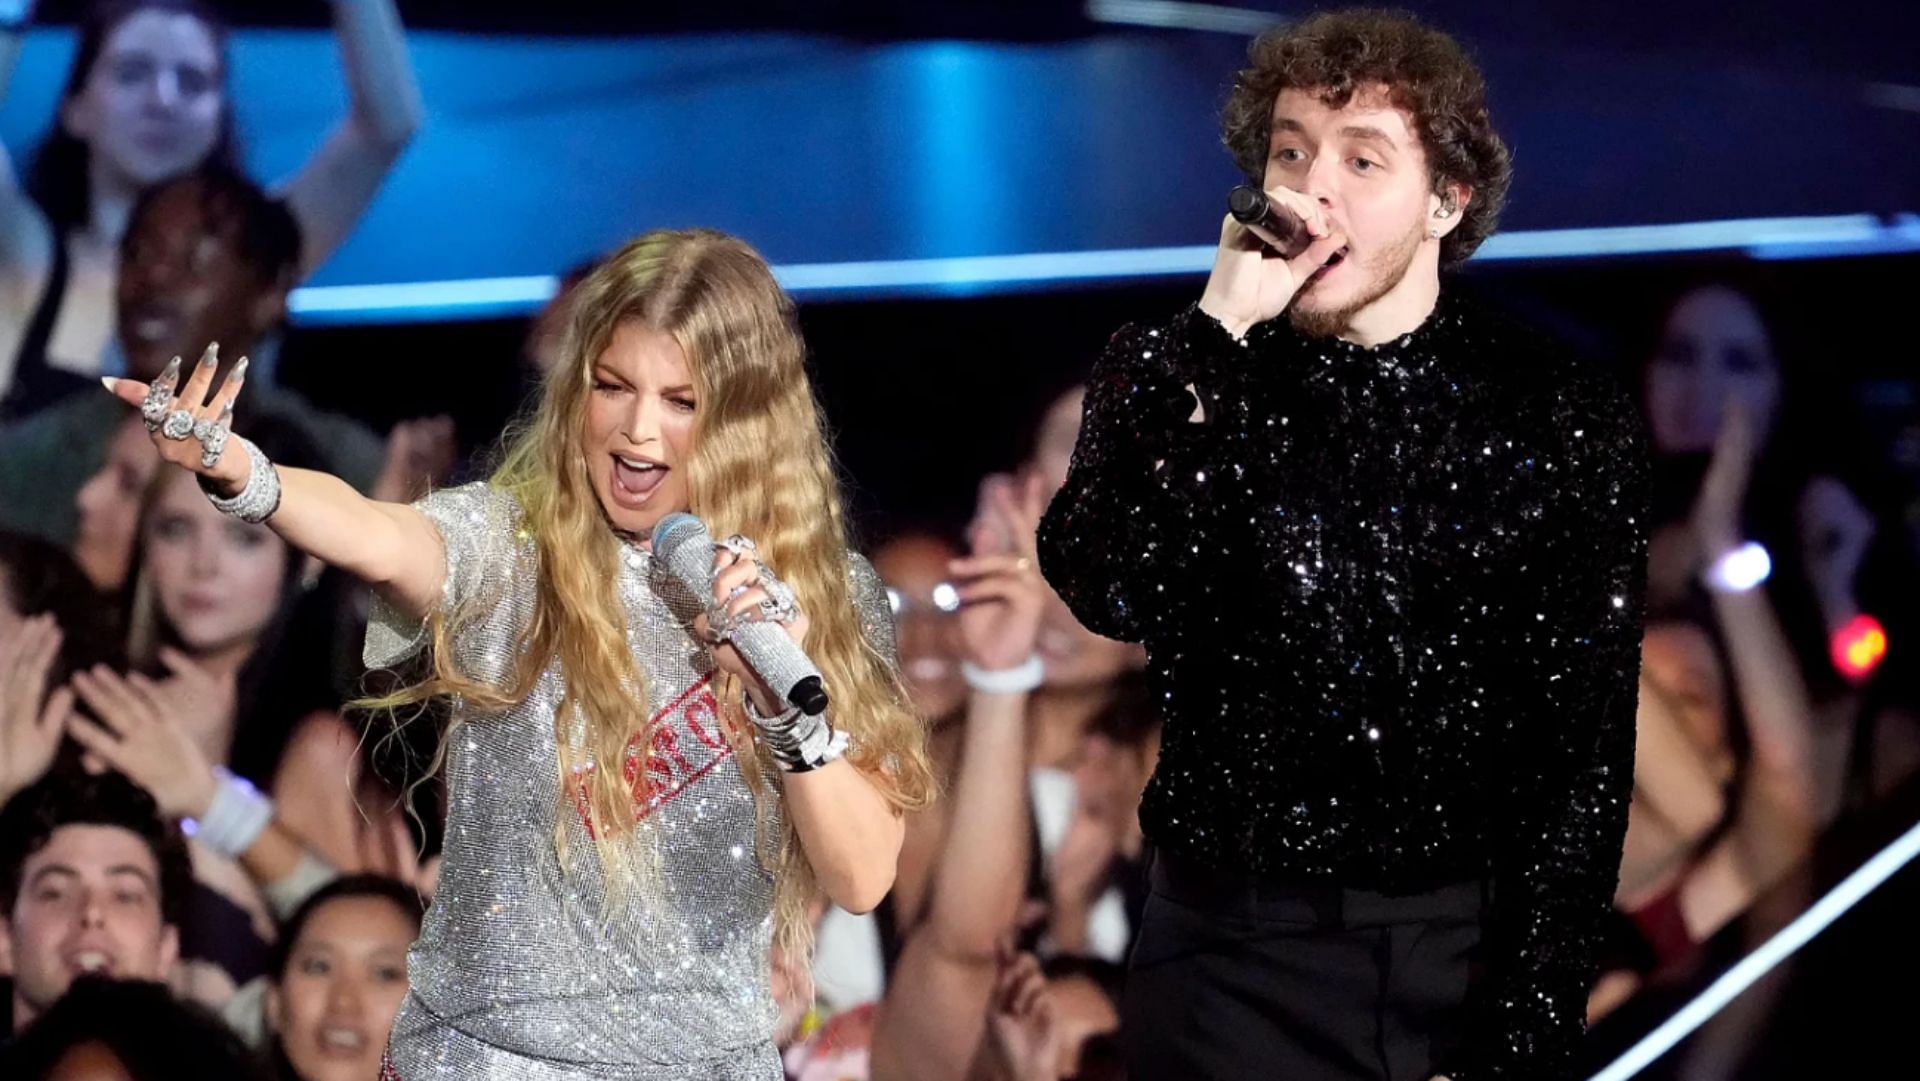 Jack Harlow brought out Fergie during his MTV VMA performance. (Image via Getty)